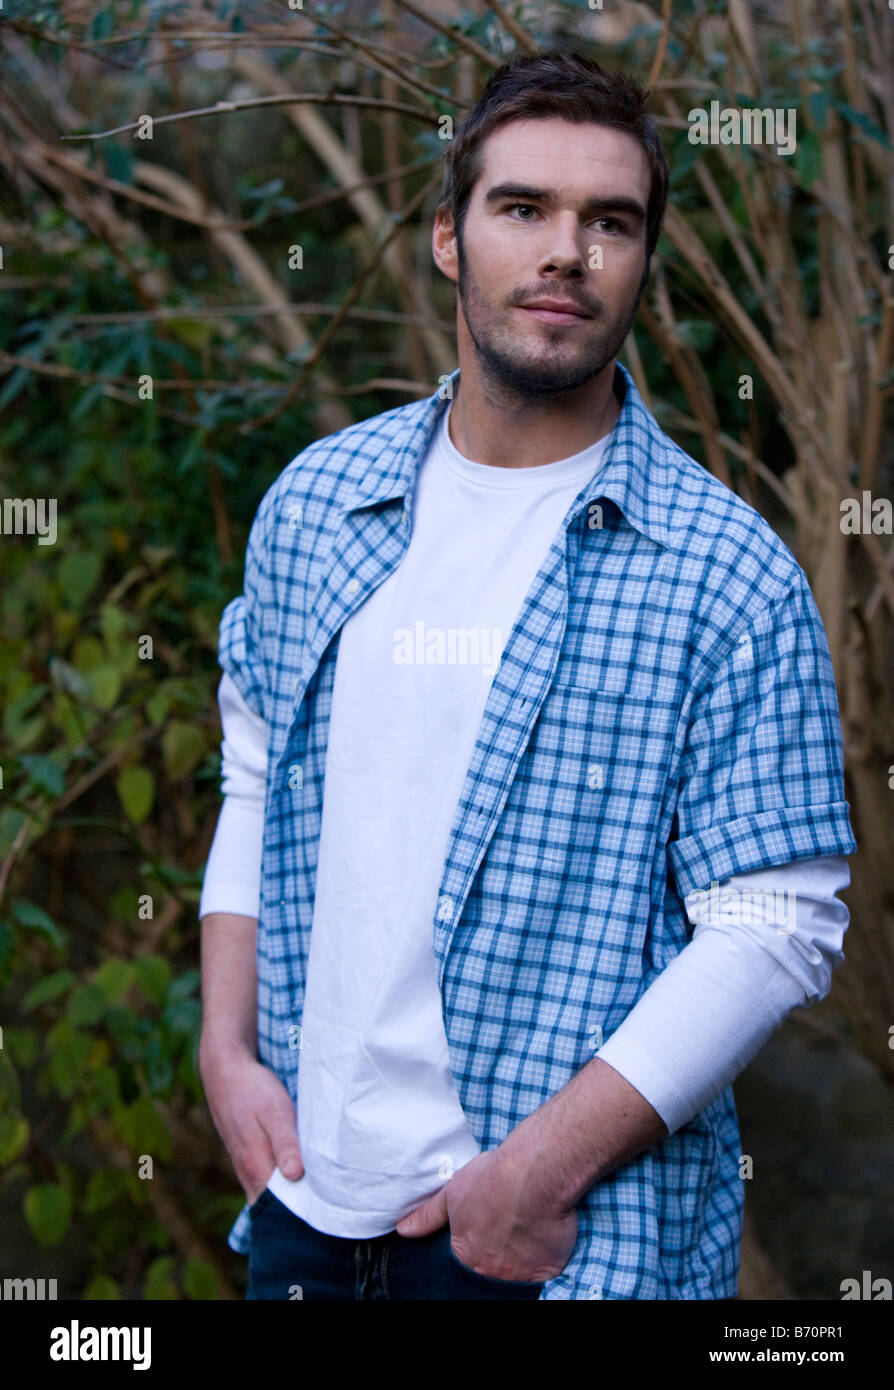 man attractive in green garden wearing white t-shirt and blue checked shirt Stock Photo